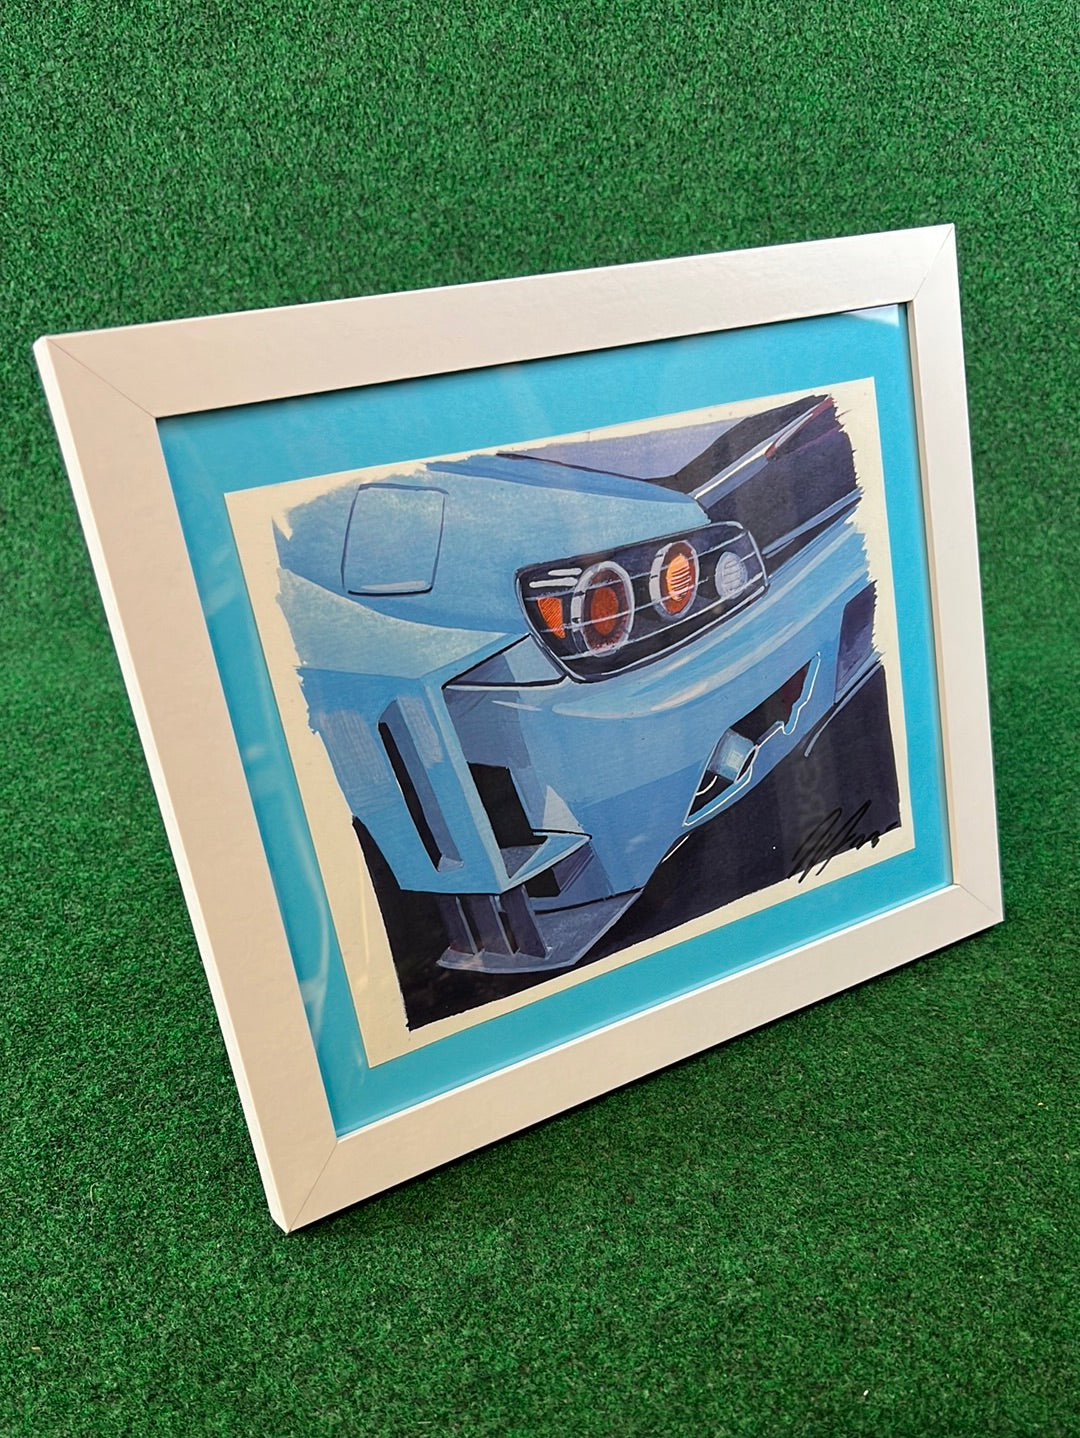 UNDERDOGZ - HONDA S2000 Rear Taillight & Aero View Hand Drawn, Watercolor Painted & Signed Print